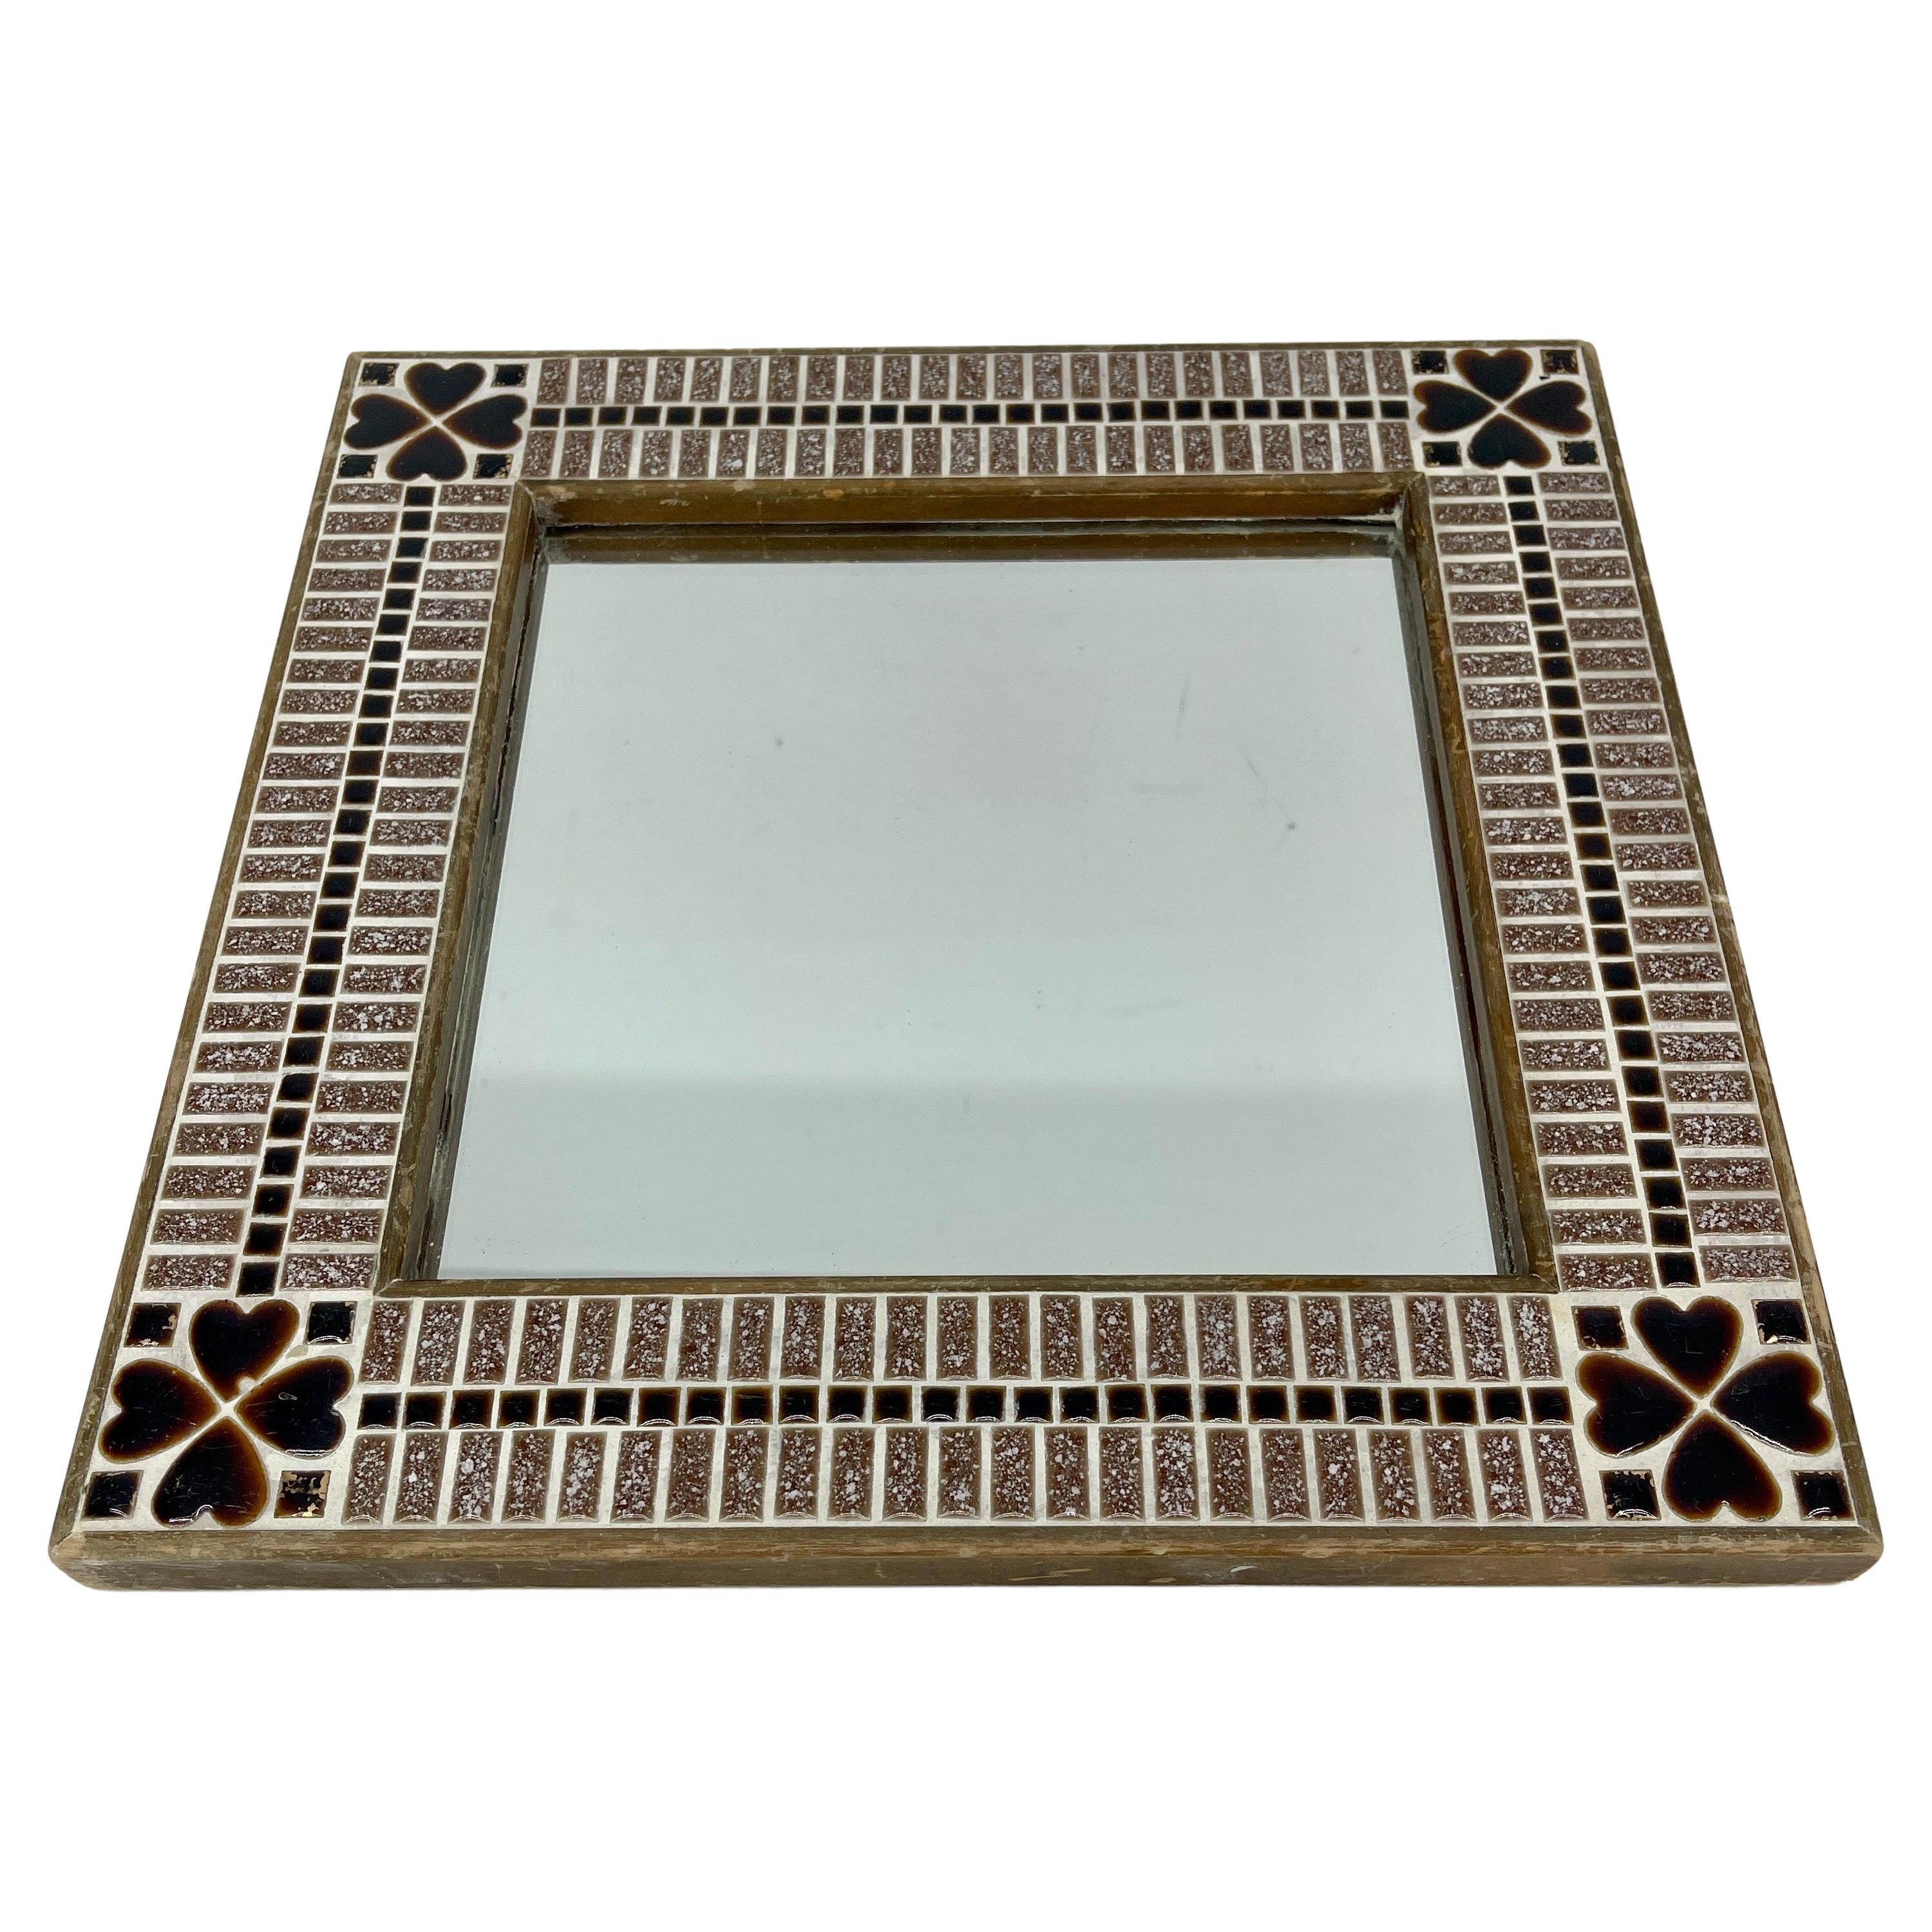 Mid-Century Modern Small Square Tile Mirror with Heart Decorations For Sale